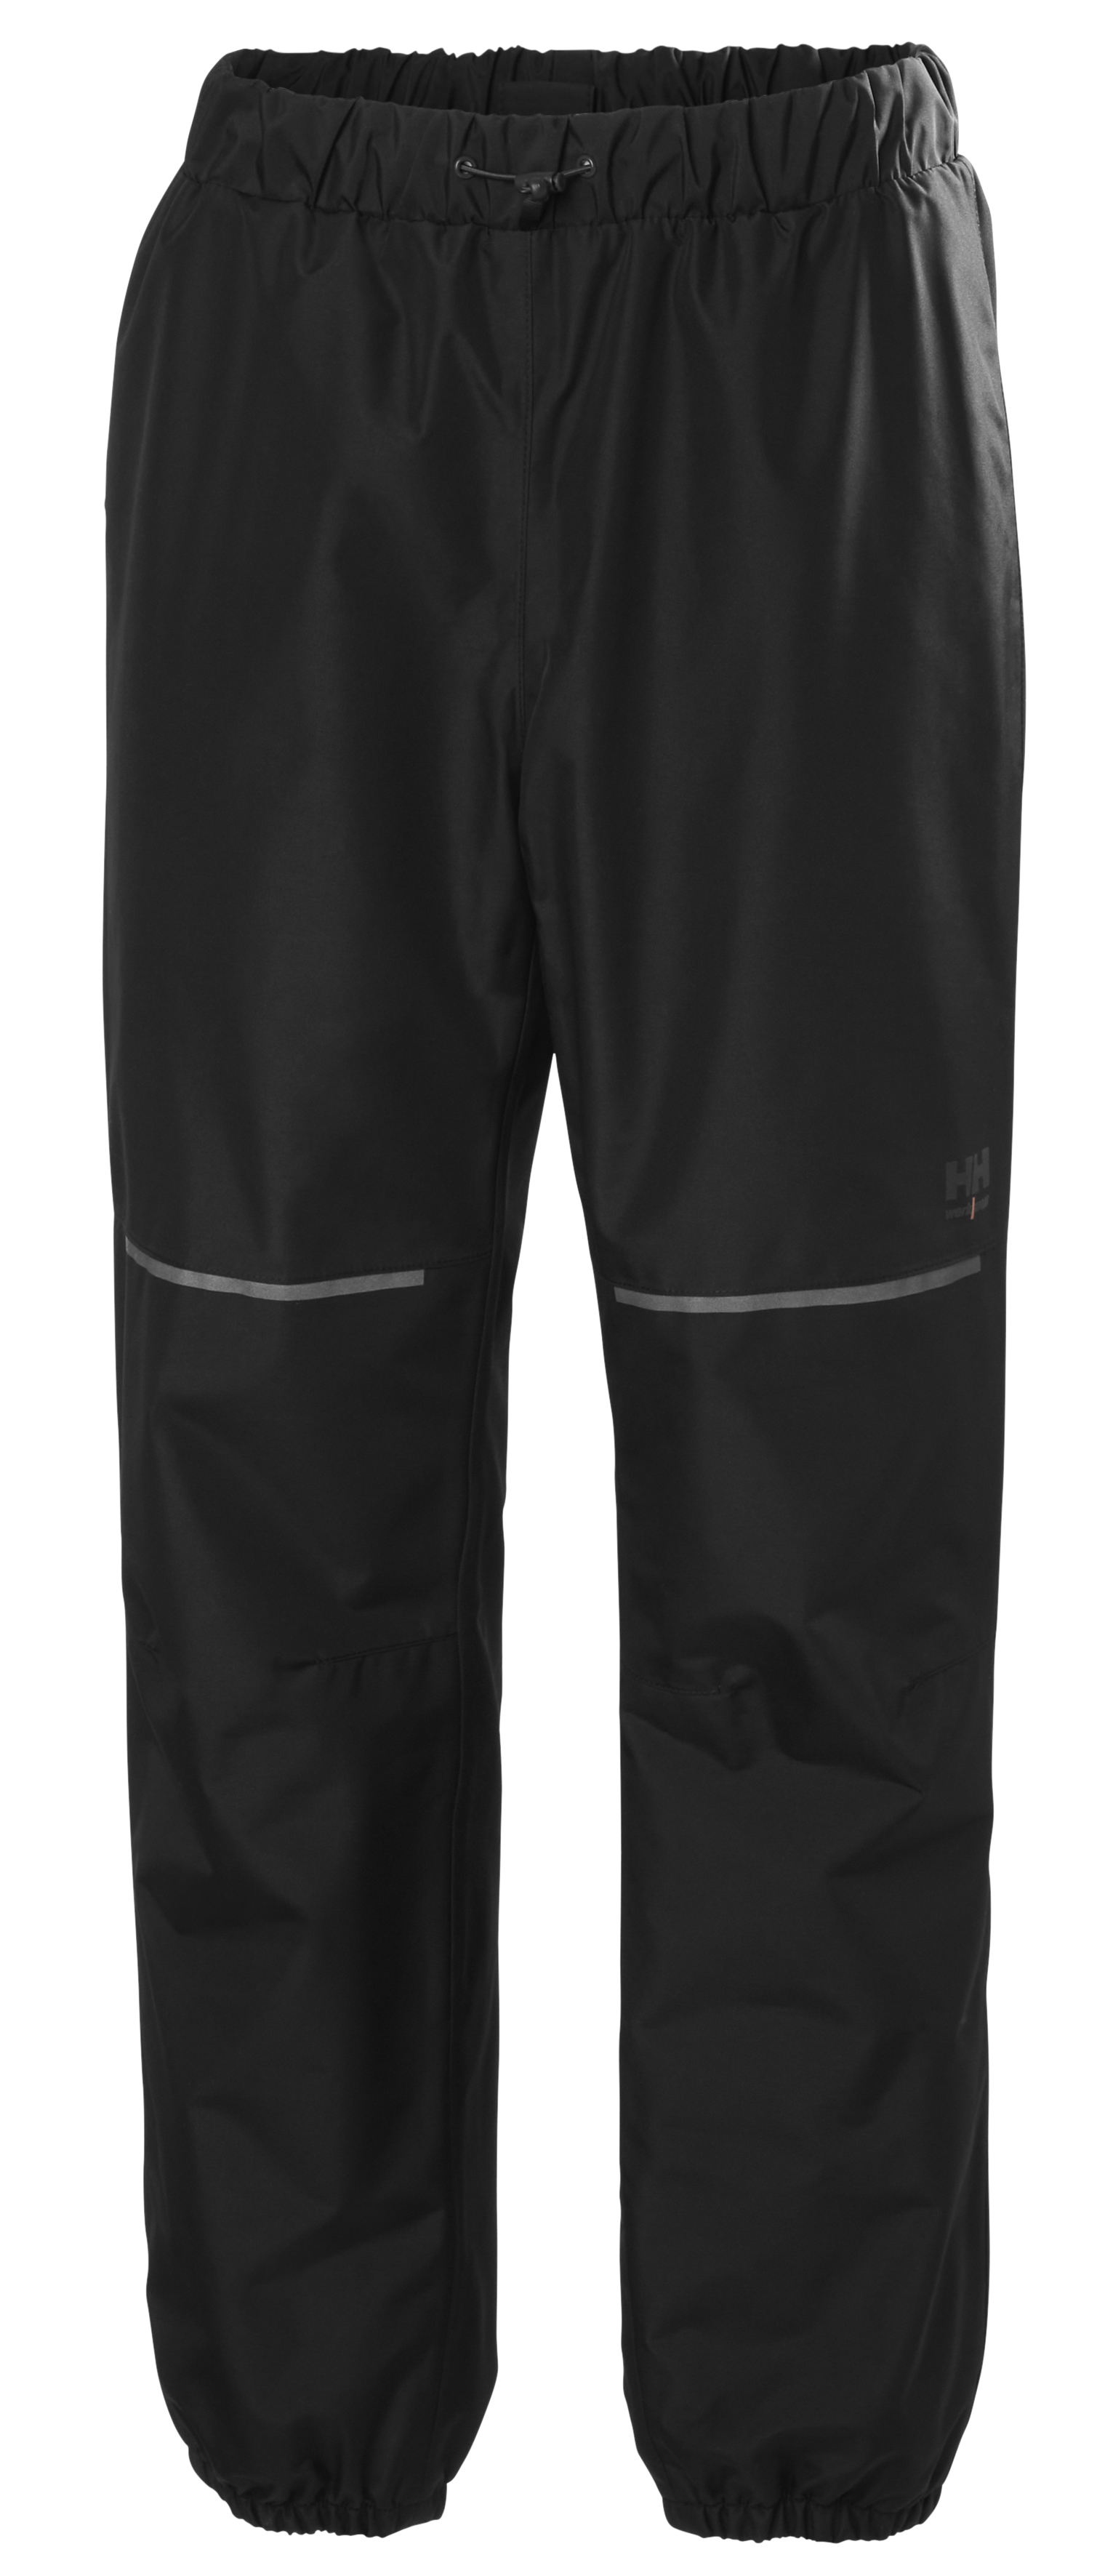 W MANCHESTER 2.0 SHELL PANT